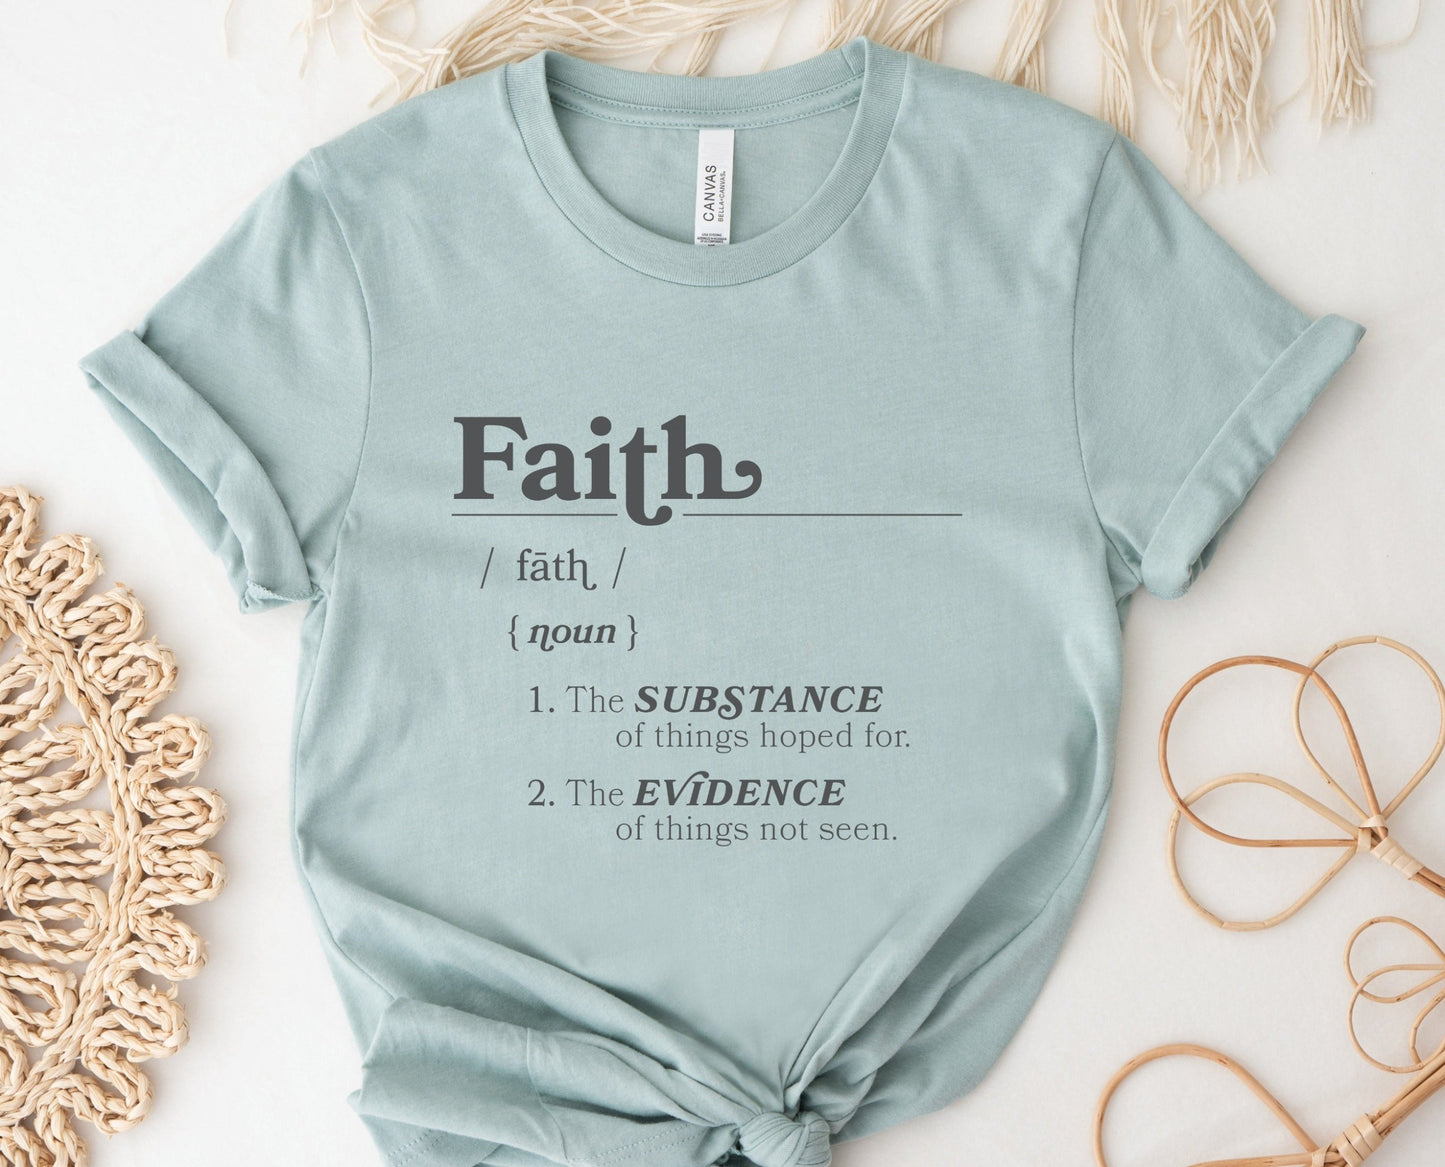 Faith Definition Hebrews 11:1 Christian aesthetic design printed in charcoal gray on soft heather dusty blue unisex t-shirt for women and men